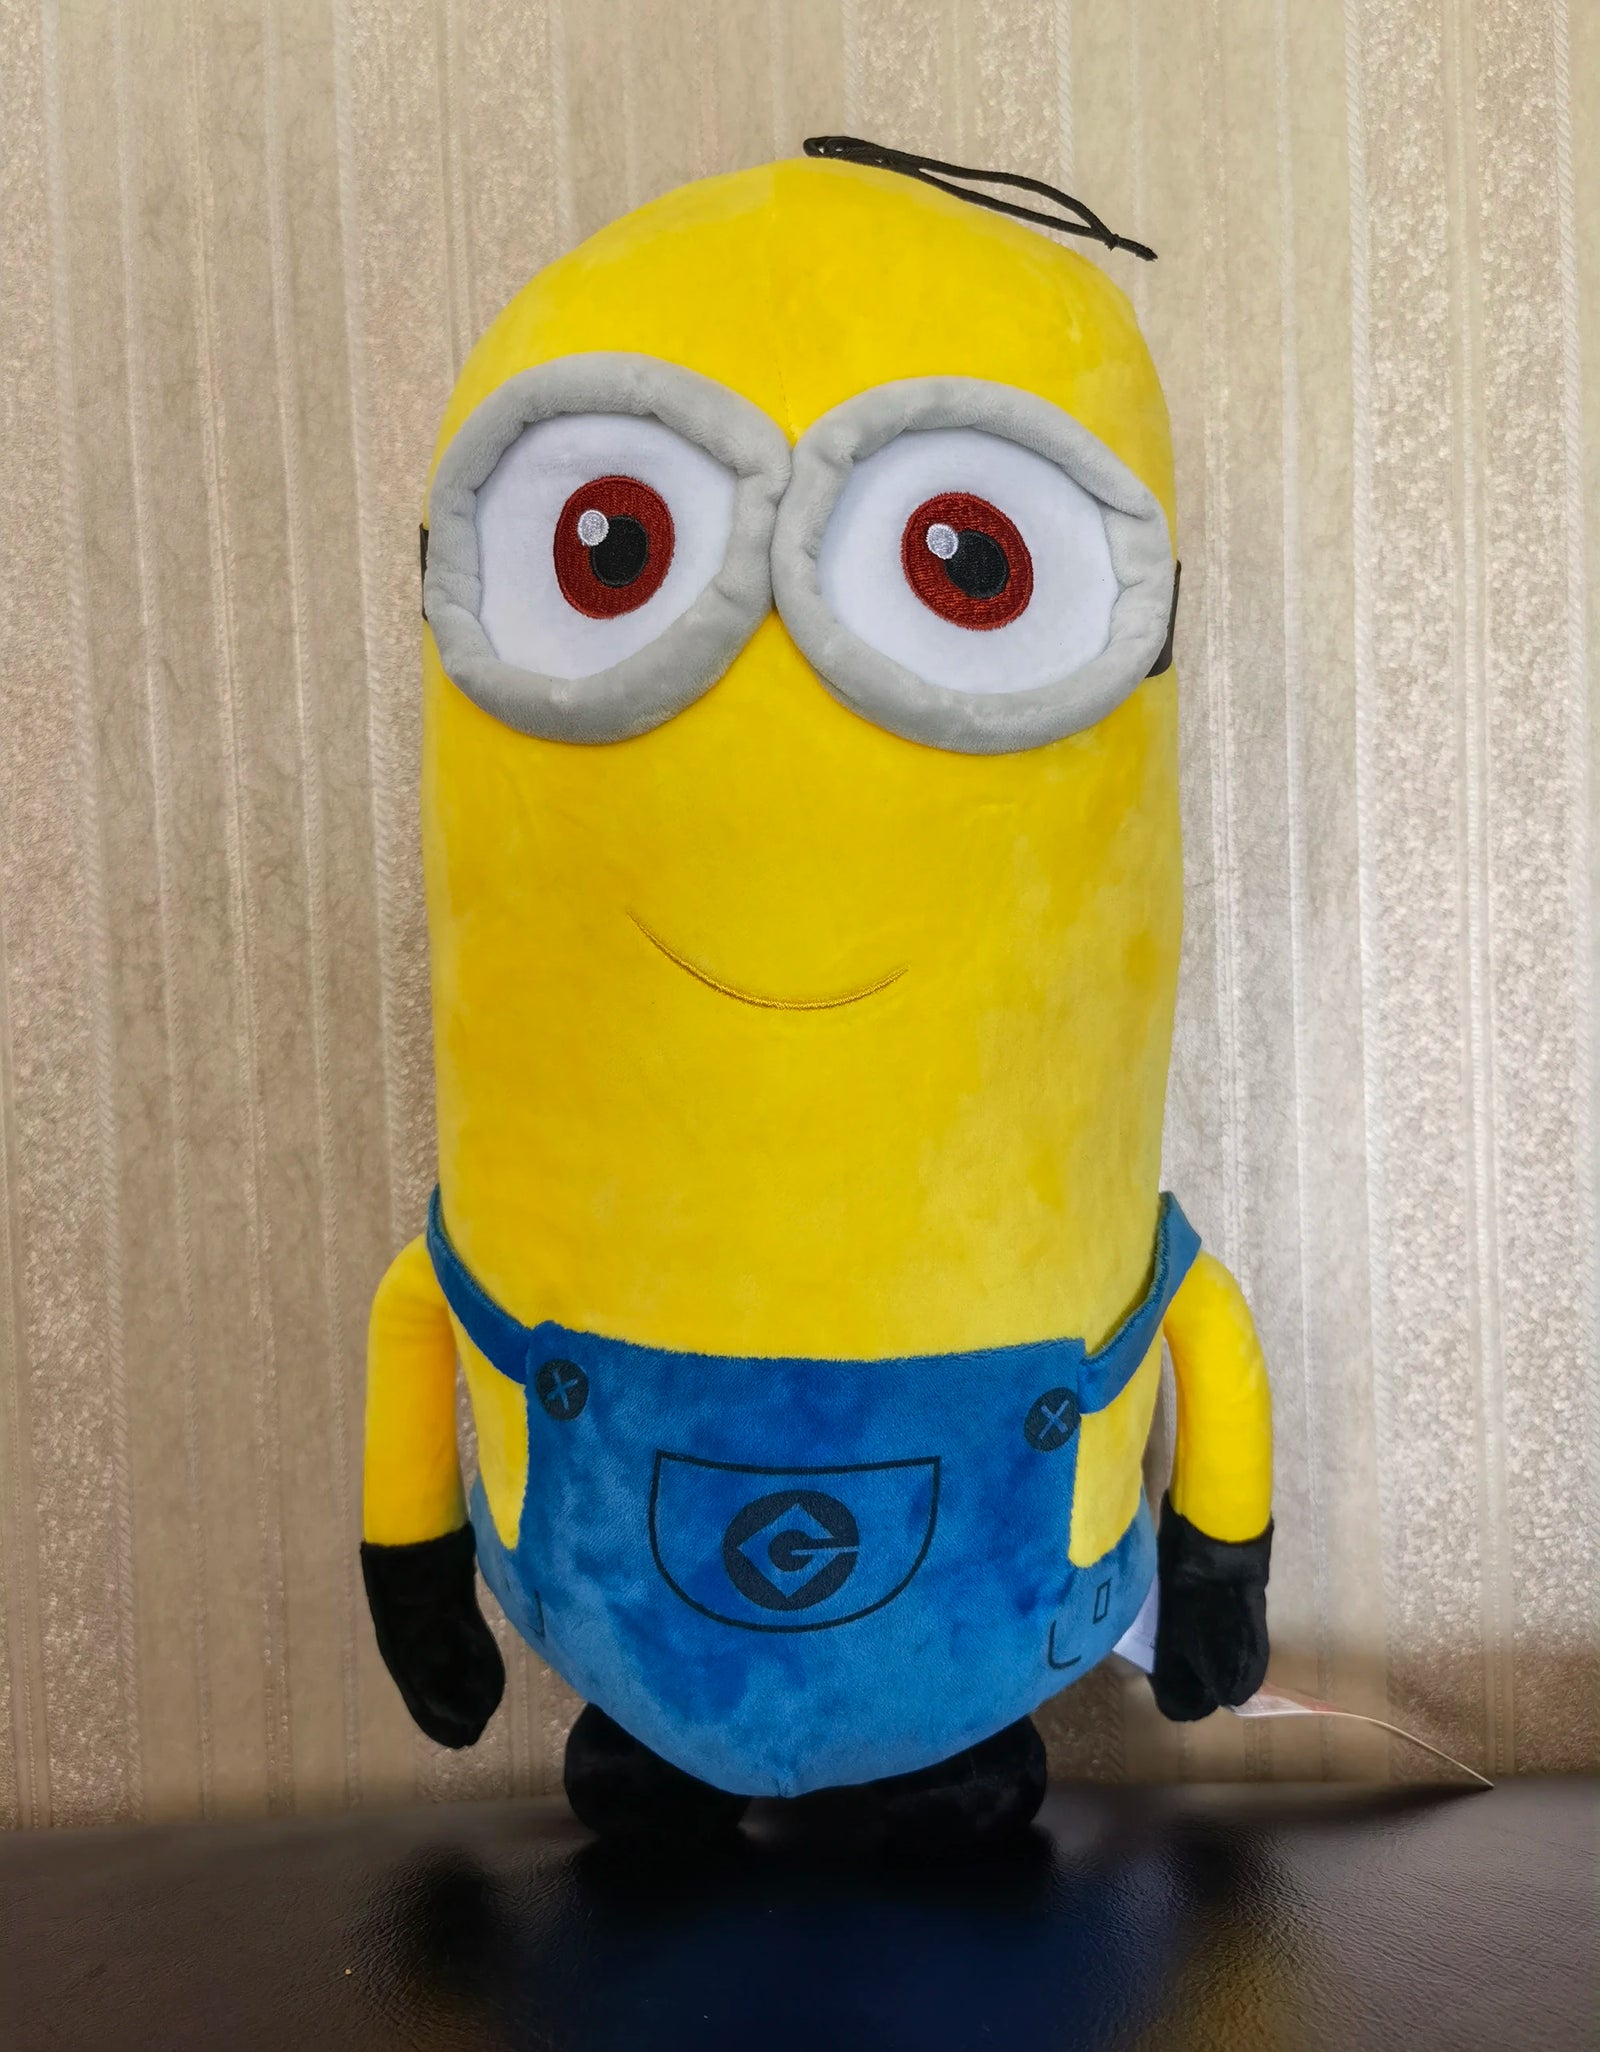 High Quality Despicable Me Minions Plush Toy 30-38cm Kids Gift Collectible Model Dolls